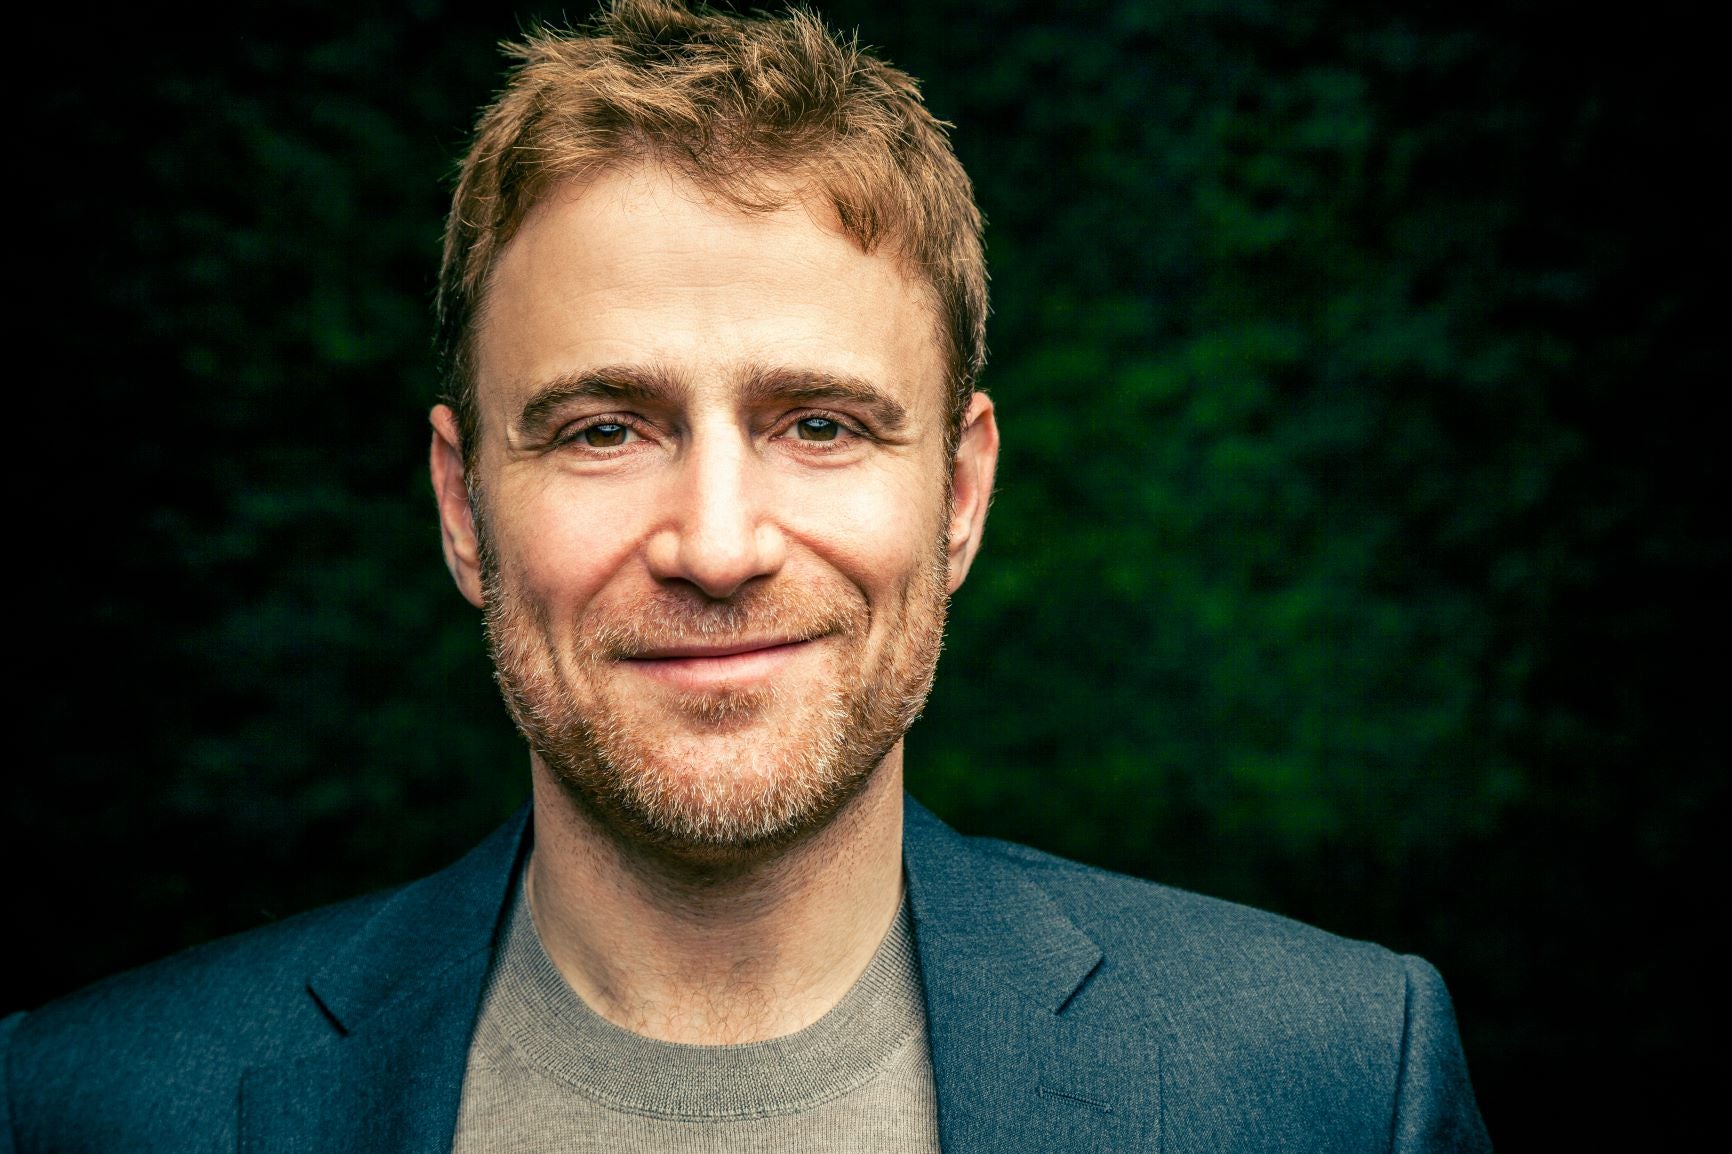 Slack Just Filed for an IPO - Here's What it Reveals